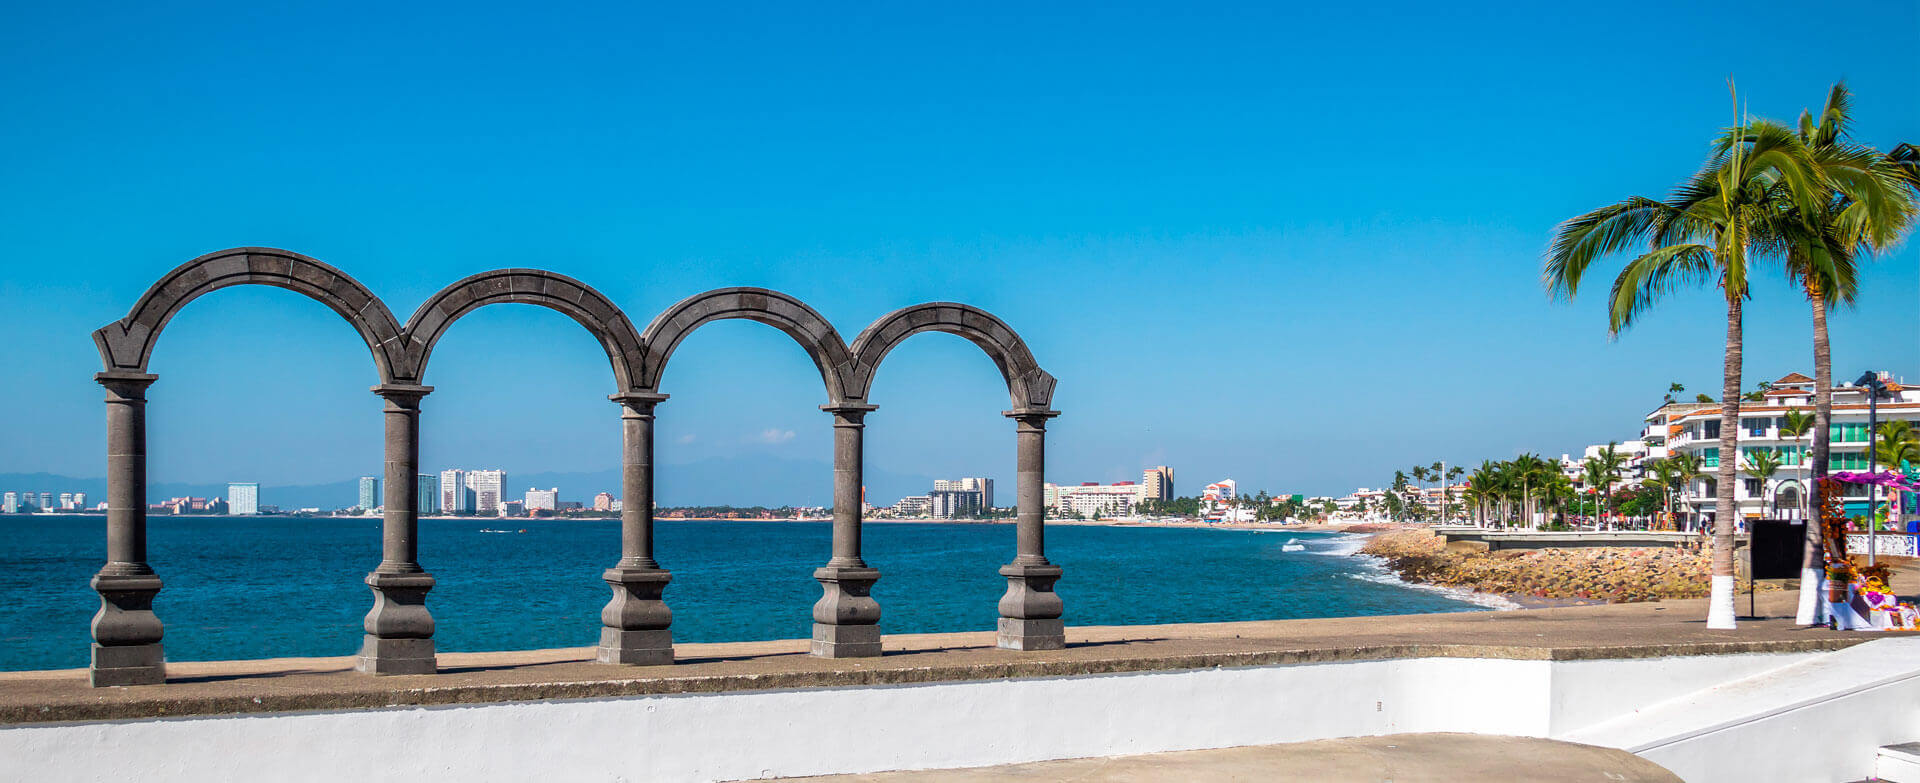 Picture of the Malecon boardwalk in Puerto Vallarta, Mexico.  The pillars of Los Arcos are in the foreground, and is framed by the boardwalk, palm trees and hotels.